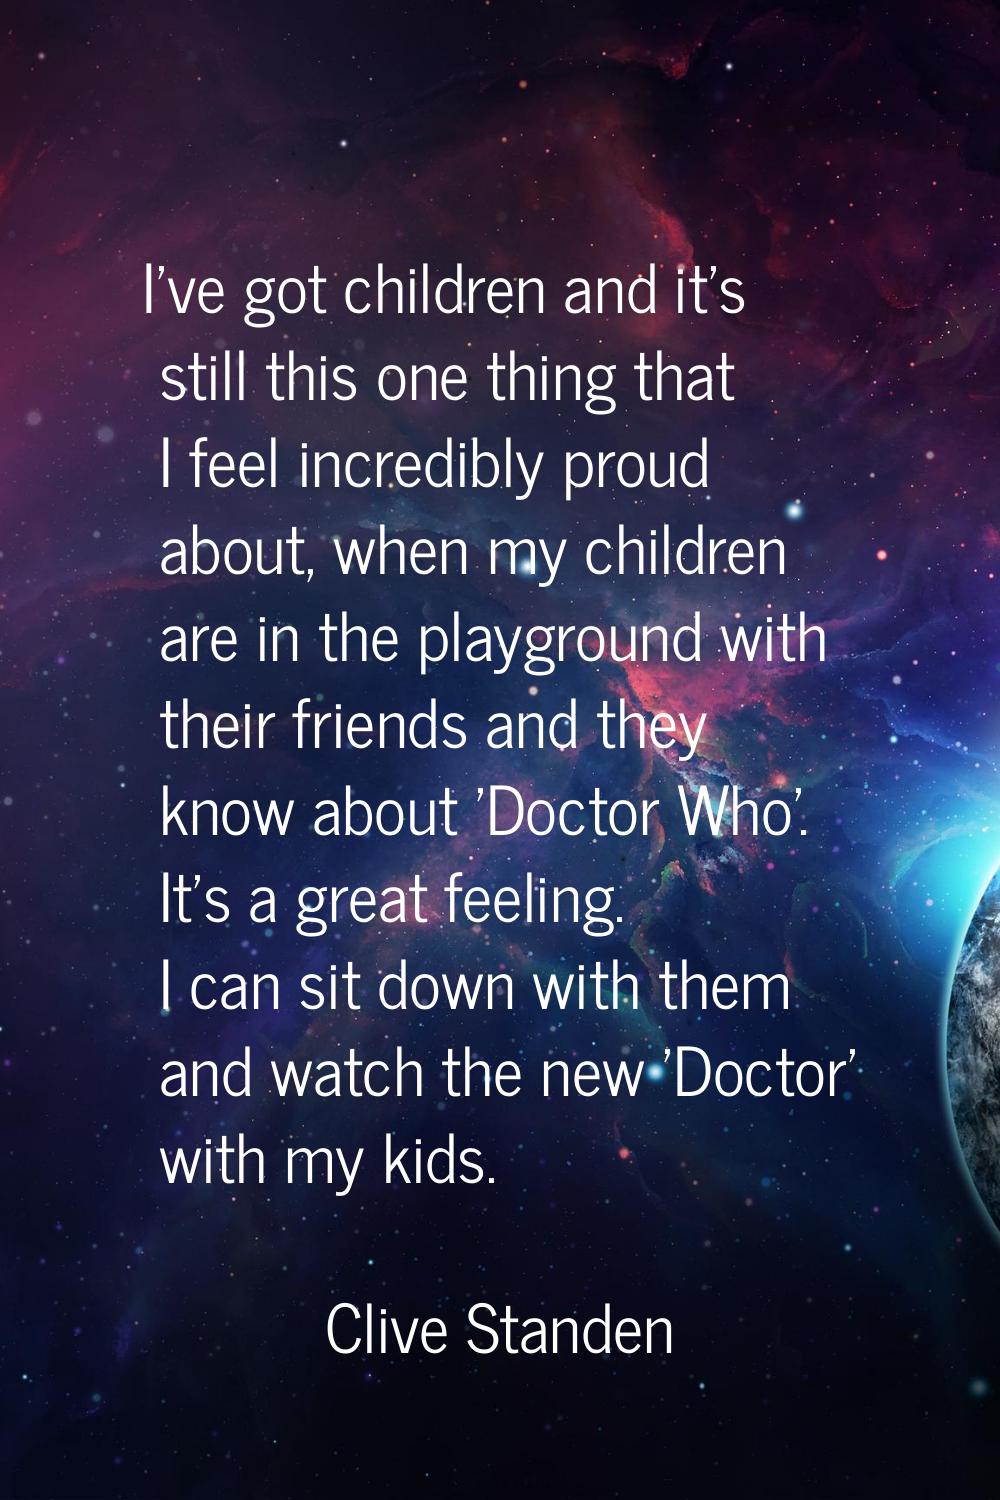 I've got children and it's still this one thing that I feel incredibly proud about, when my childre